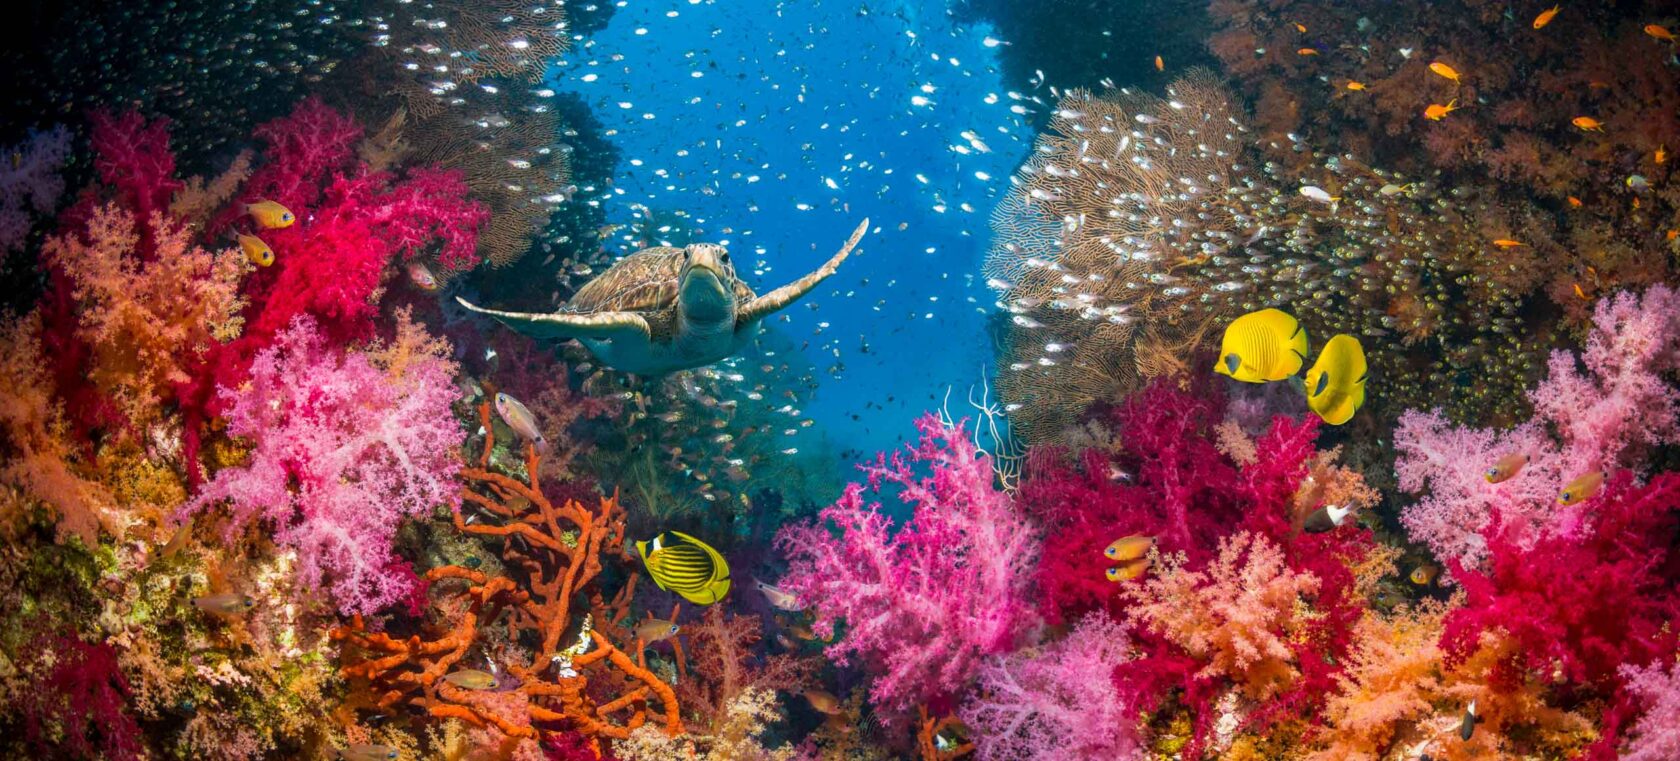 Coral reef scenery with a green sea turtle swimming over soft corals.